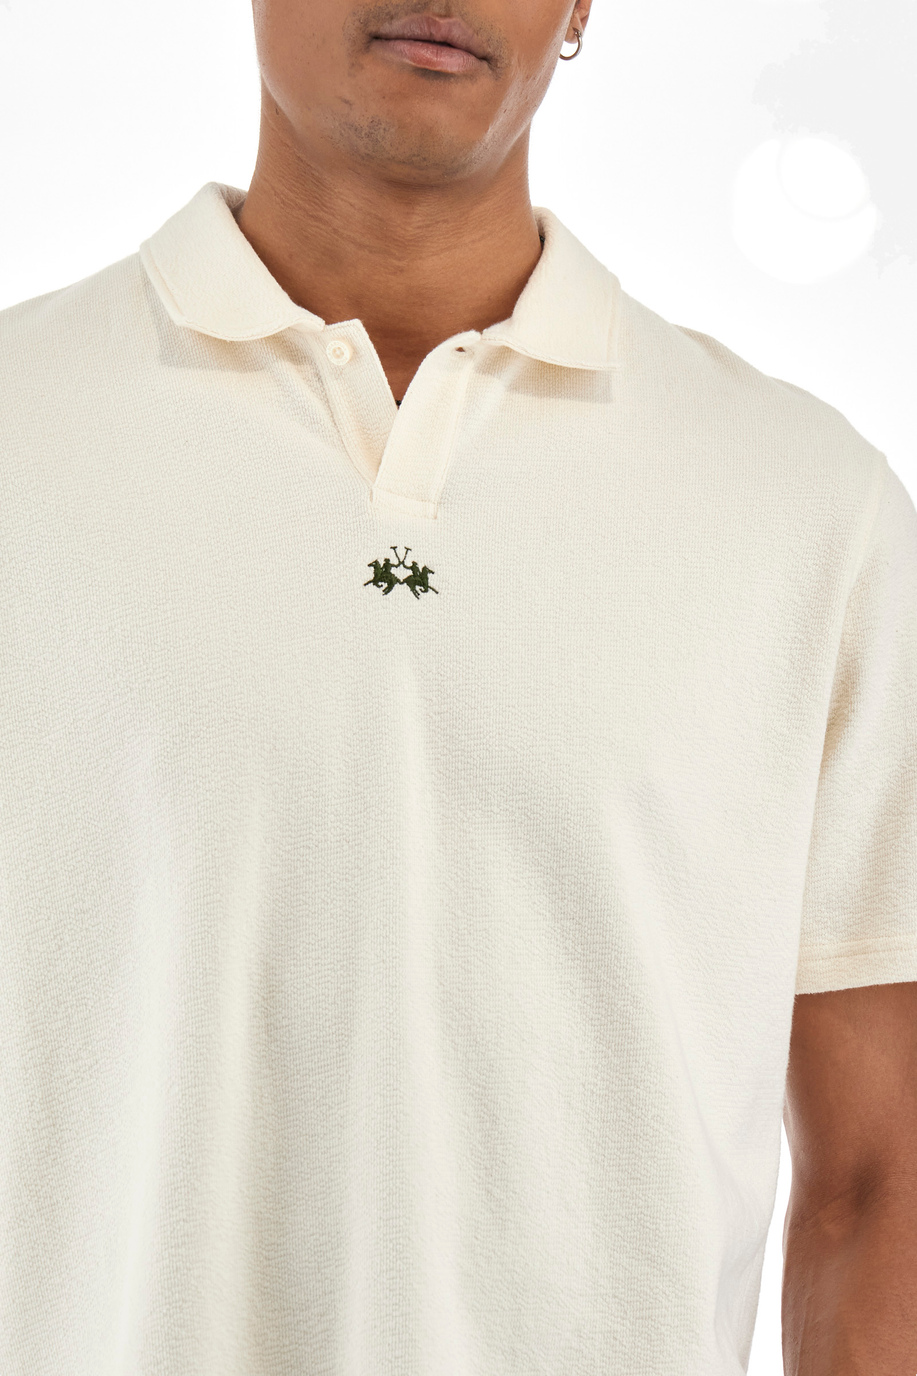 Regular-fit polo shirt in cotton - Yuzo - Spring looks for him | La Martina - Official Online Shop